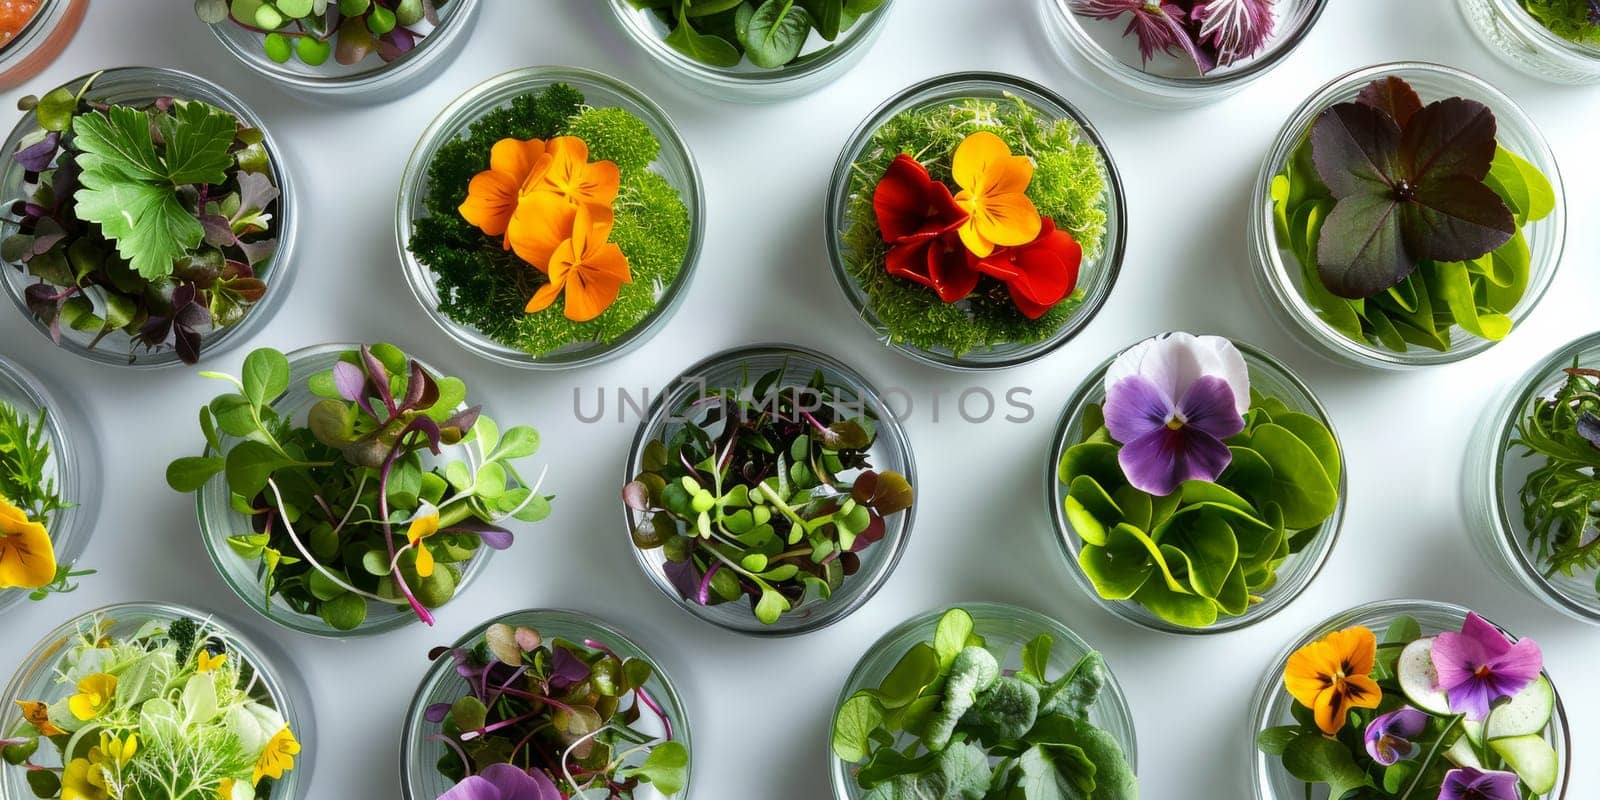 Garnishes and decorations used in a gourmet cuisine, such as microgreens, edible flowers, or delicate herb leaves by Kadula